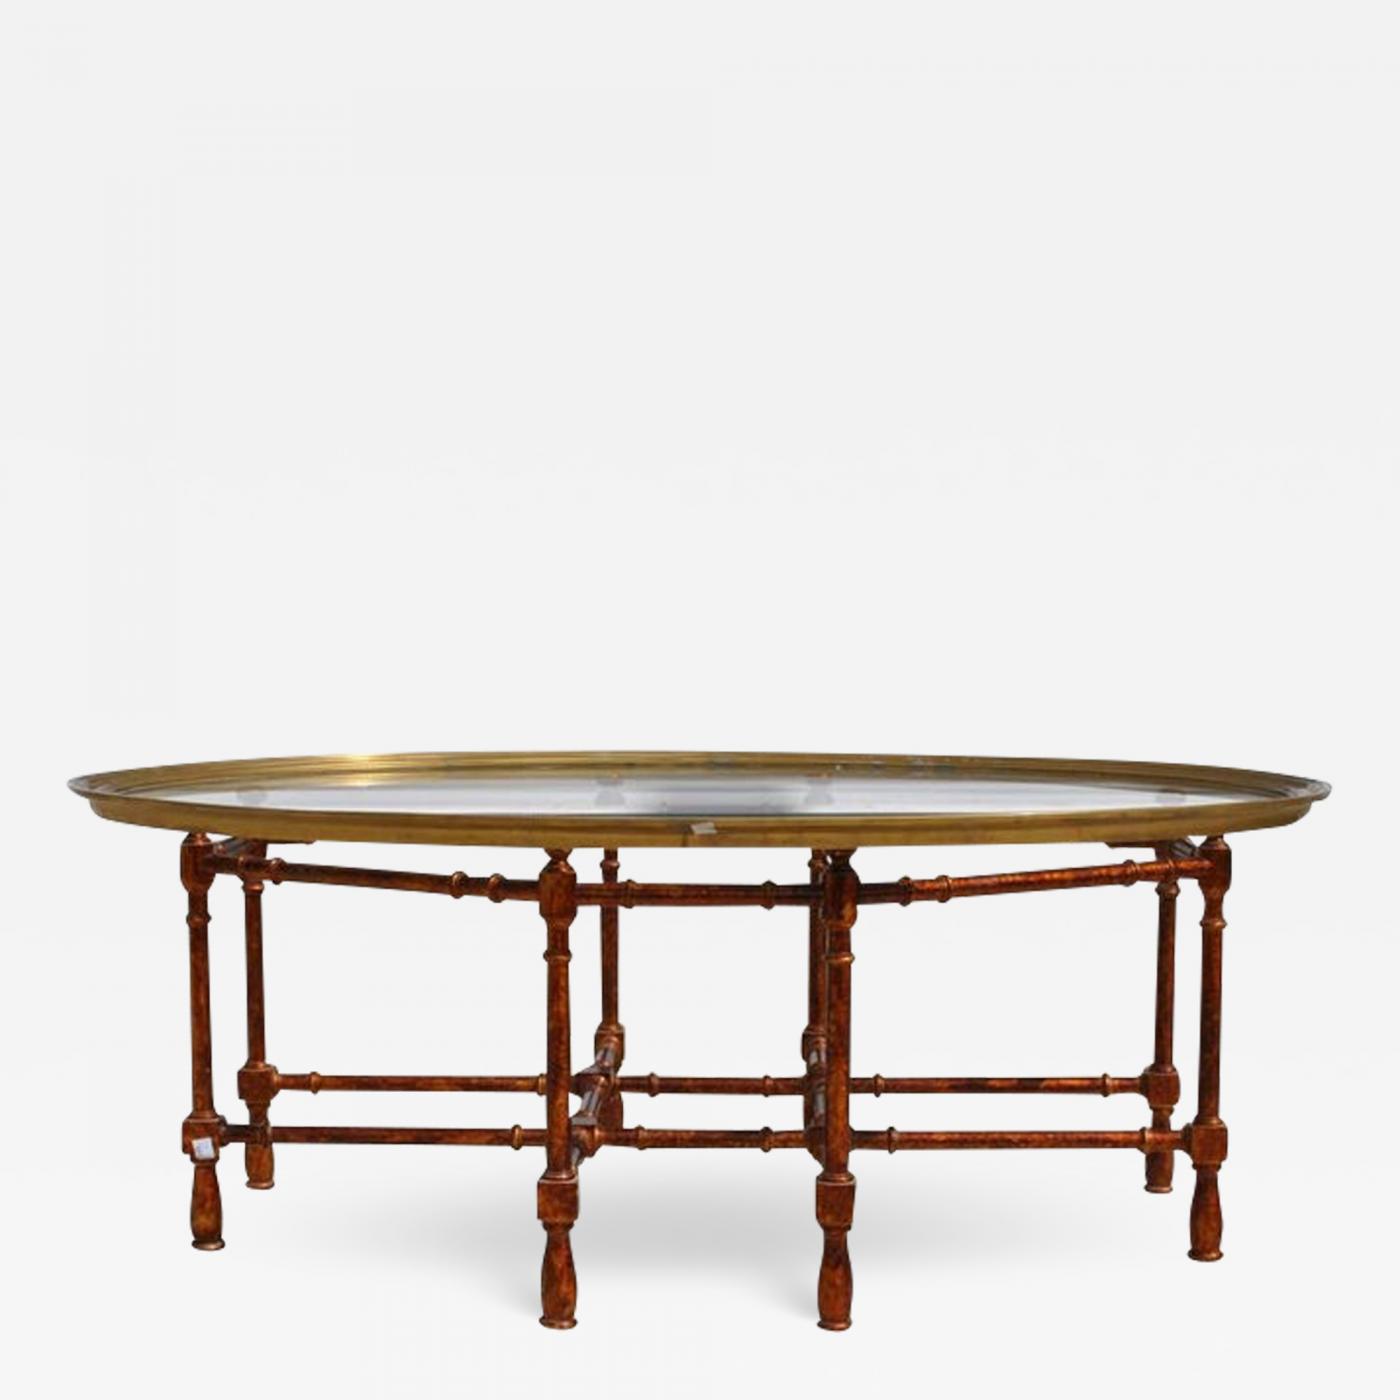 https://cdn.incollect.com/sites/default/files/zoom/-Baker-Furniture-Company-Vintage-Midcentury-Baker-Faux-Bamboo-Brass-Coffee-Table-575529-2701974.jpg